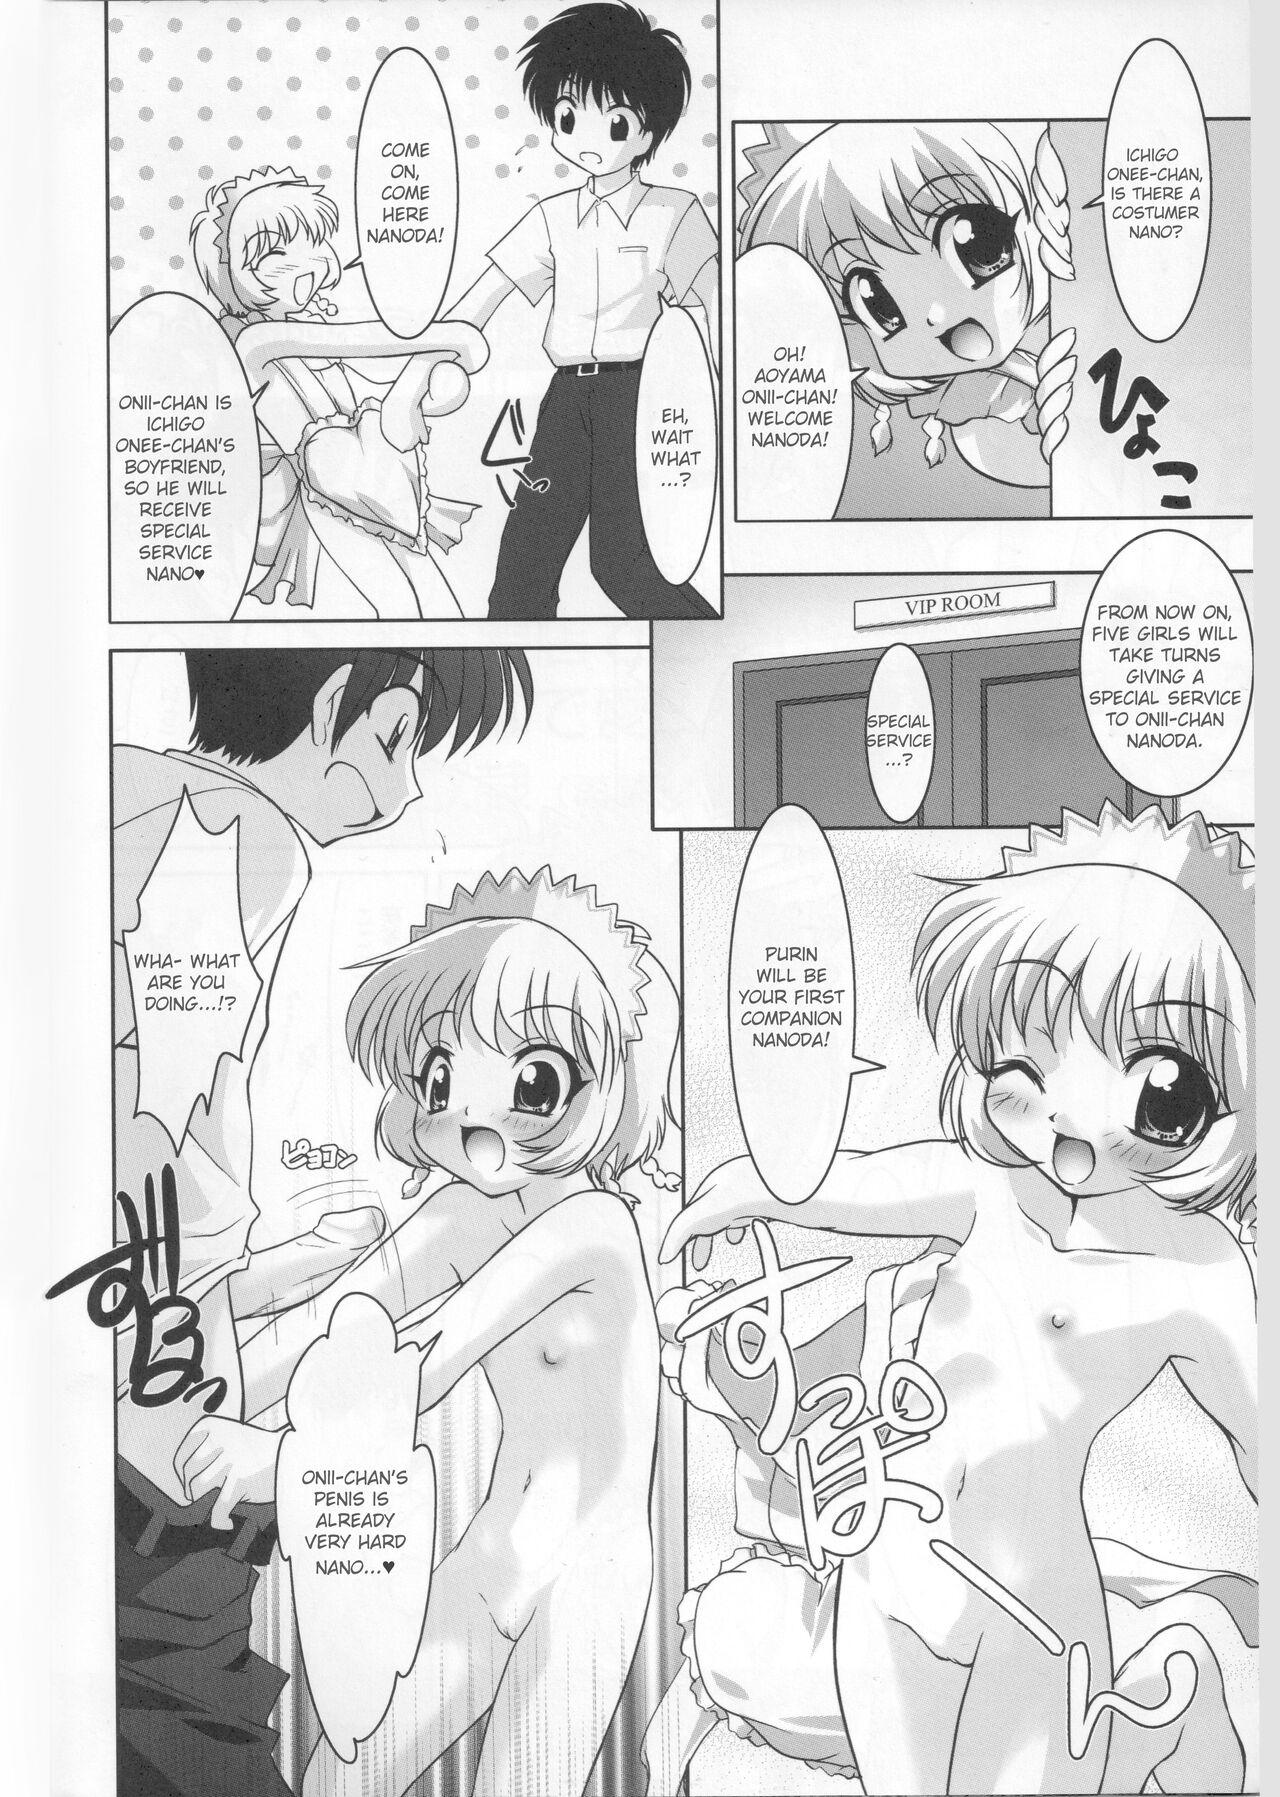 Neighbor Ring My Bell - MAGICALDELTA.COM - Tokyo mew mew | mew mew power Secret - Page 5